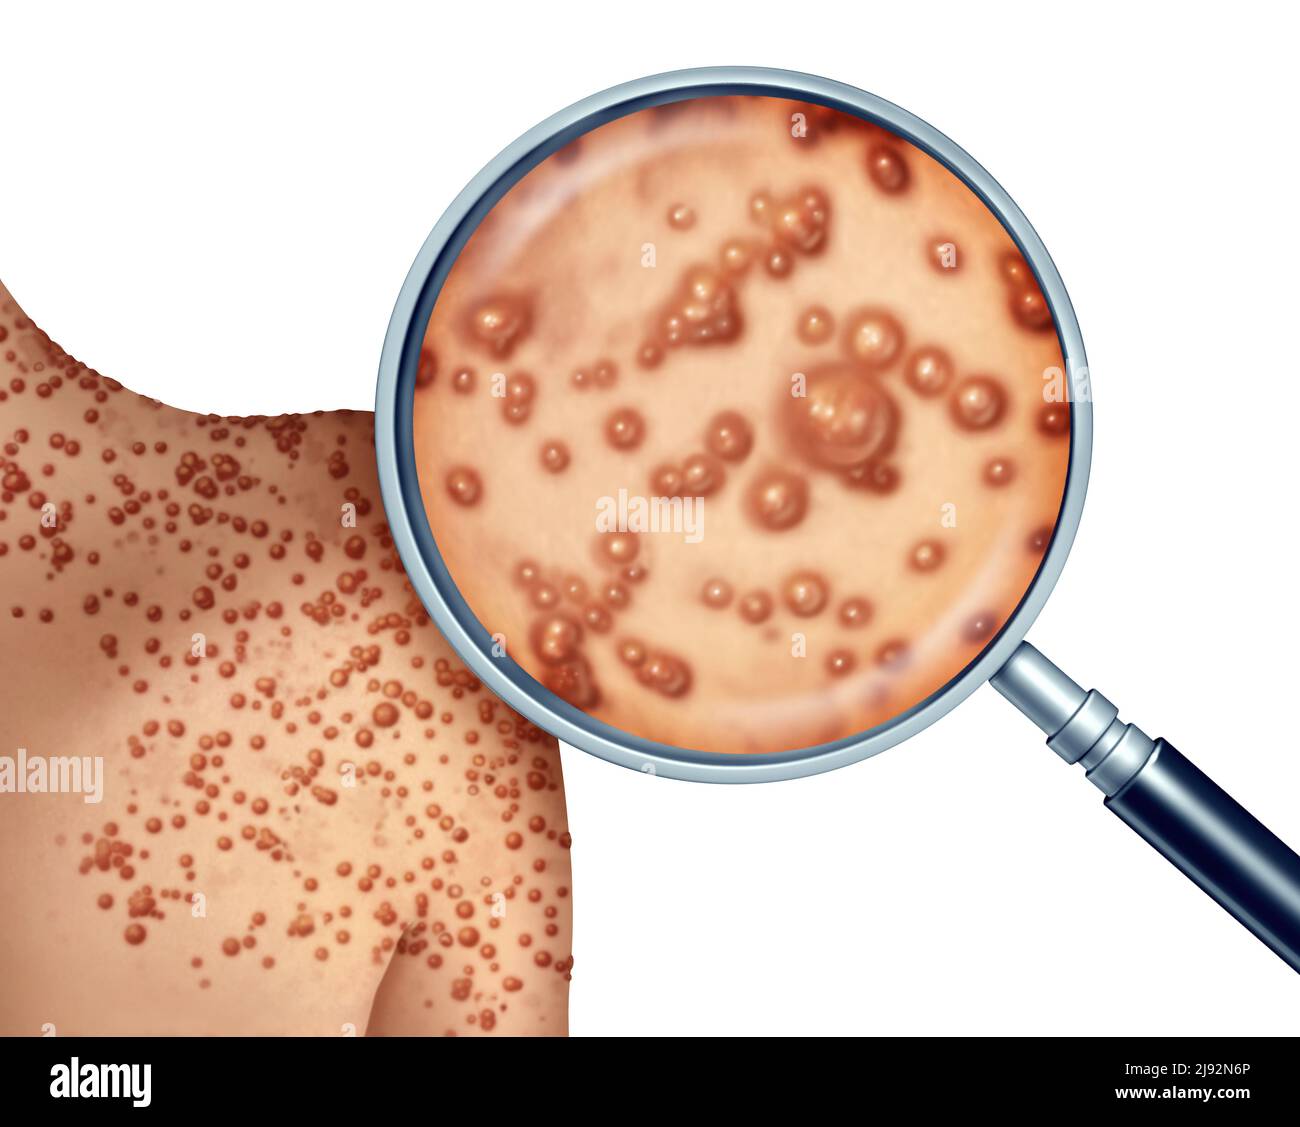 Monkeypox Virus Outbreak as a contagious infection as blisters and leisons on the skin representing transmission of an infected person. Stock Photo